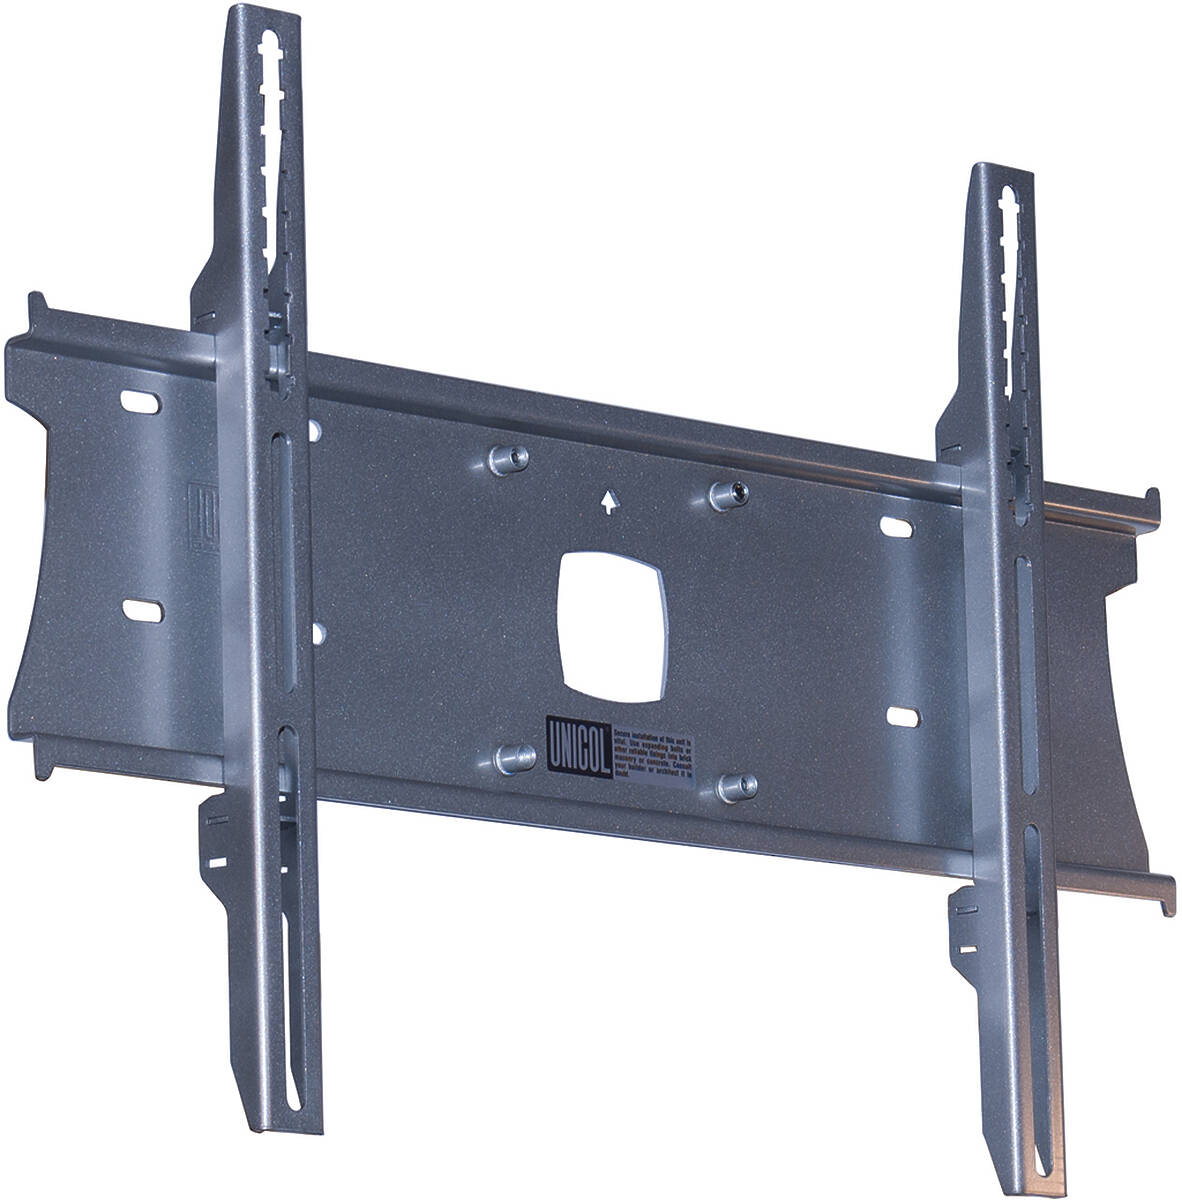 Unicol SS PZX3 Pozimount stainless steel harsh environment flat wall mount for Large Format Displays product image. Click to enlarge.